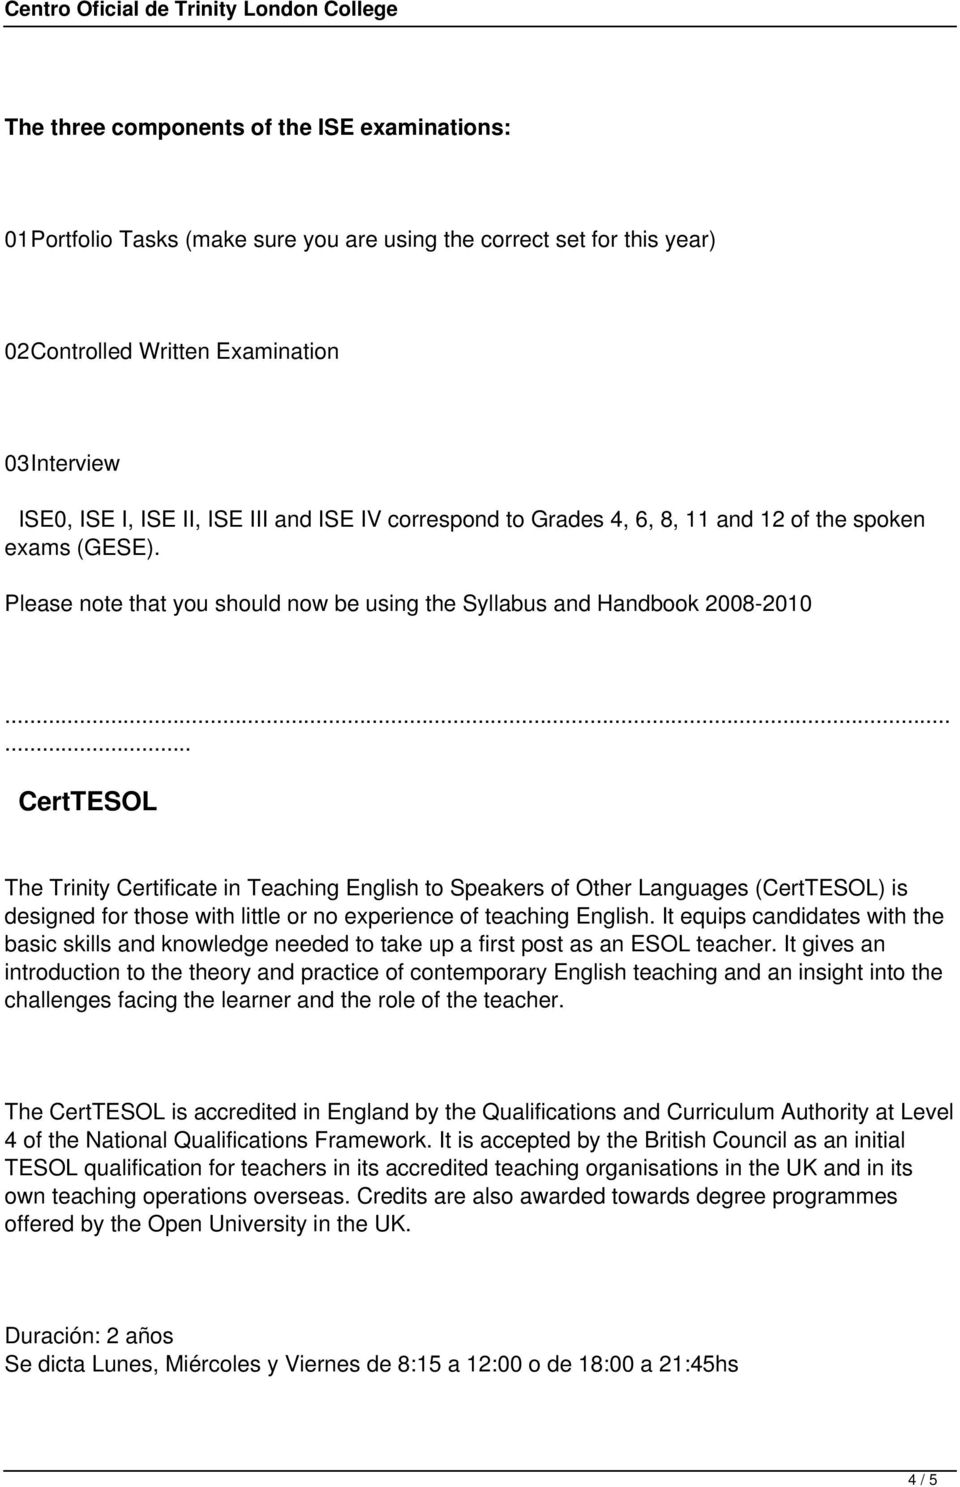 Please note that you should now be using the Syllabus and Handbook 2008-2010 CertTESOL The Trinity Certificate in Teaching English to Speakers of Other Languages (CertTESOL) is designed for those